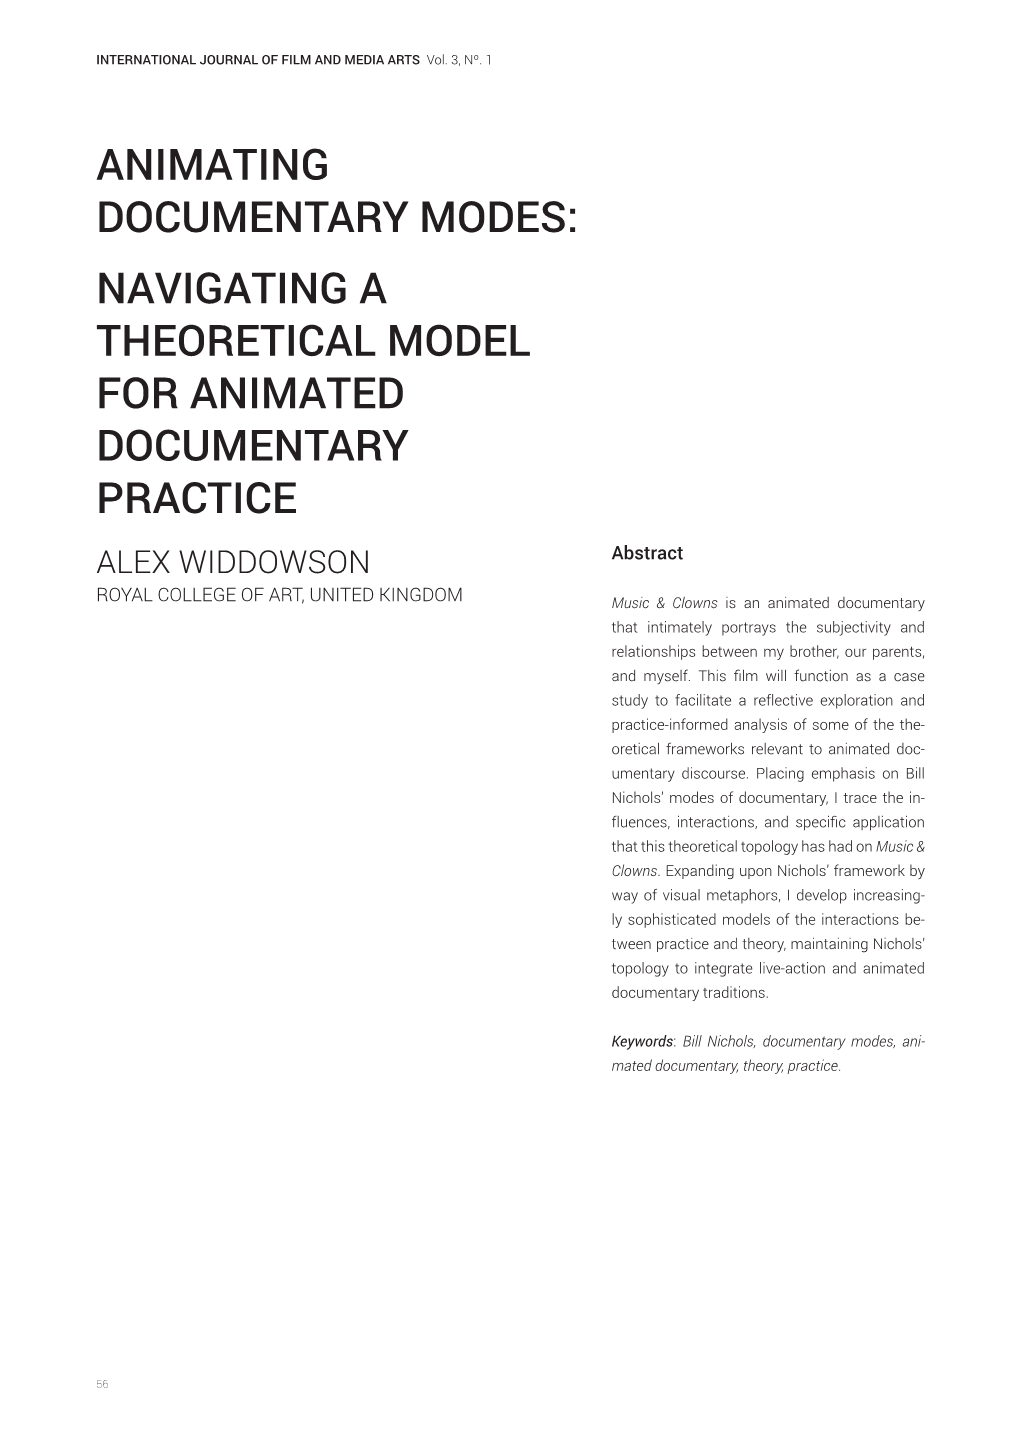 NAVIGATING a THEORETICAL MODEL for ANIMATED DOCUMENTARY PRACTICE ALEX WIDDOWSON Abstract